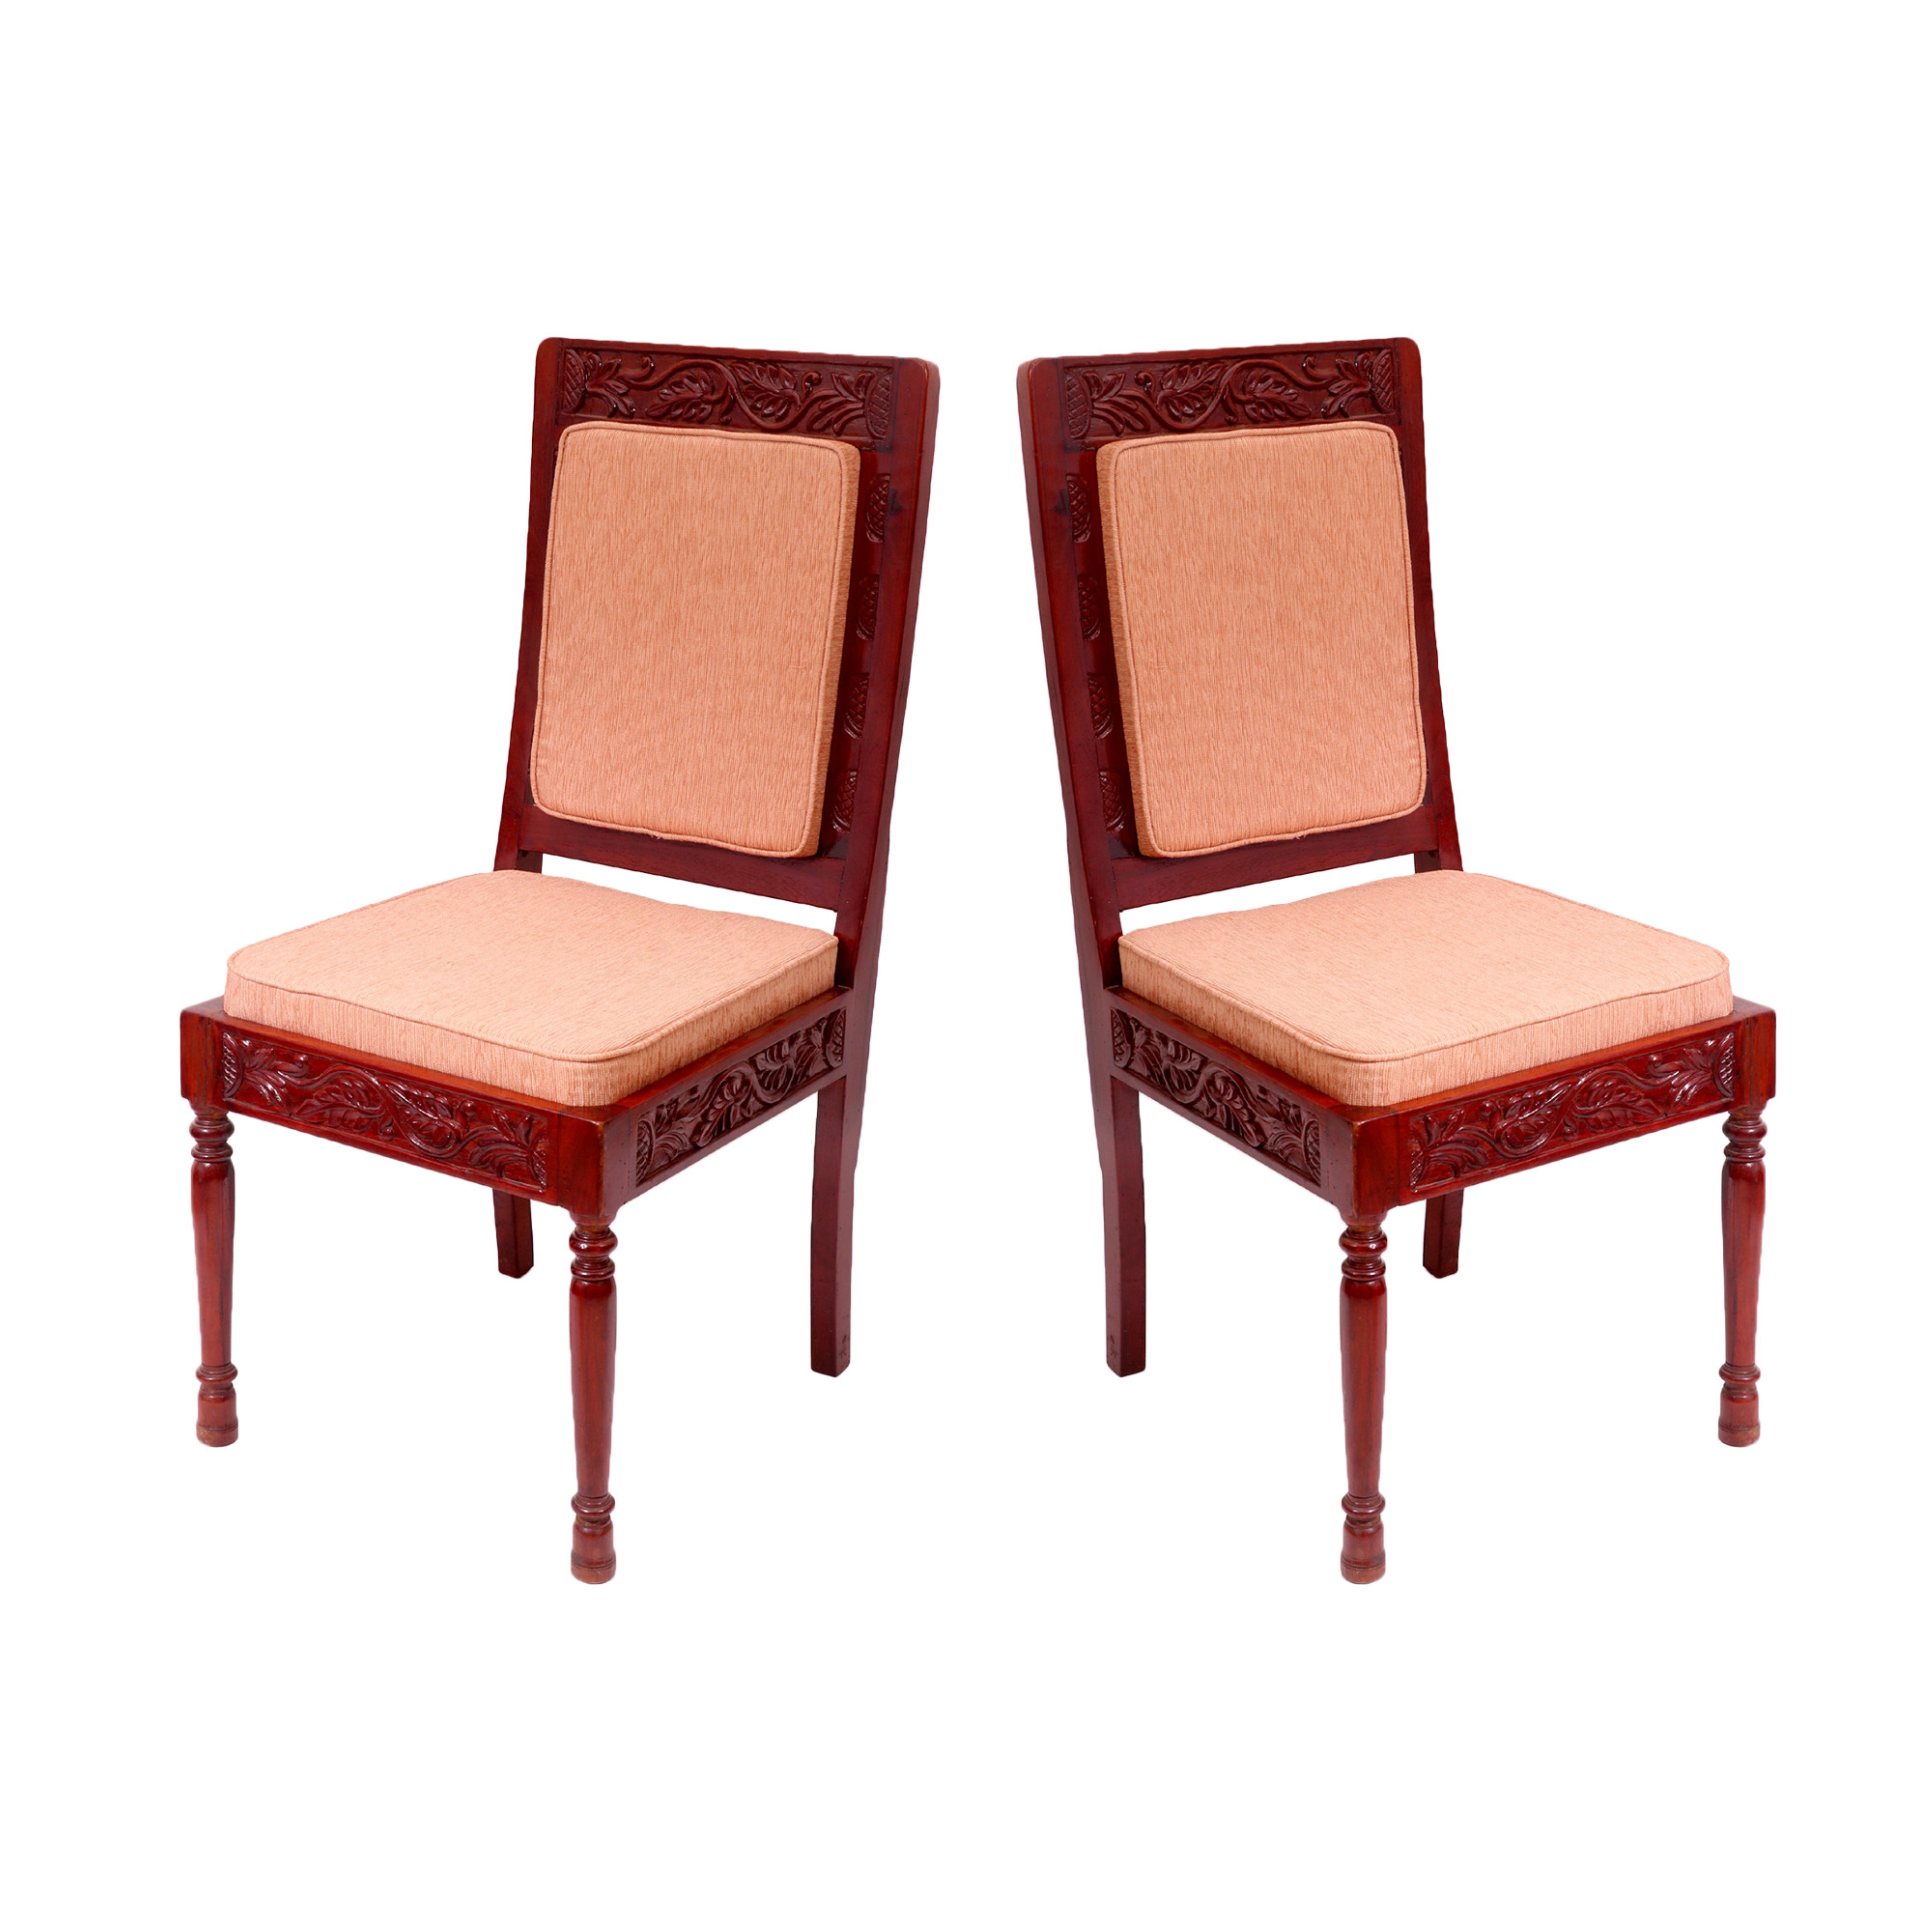 (Set of 2) Perfect Square Wooden Carving Chair Dining Chair